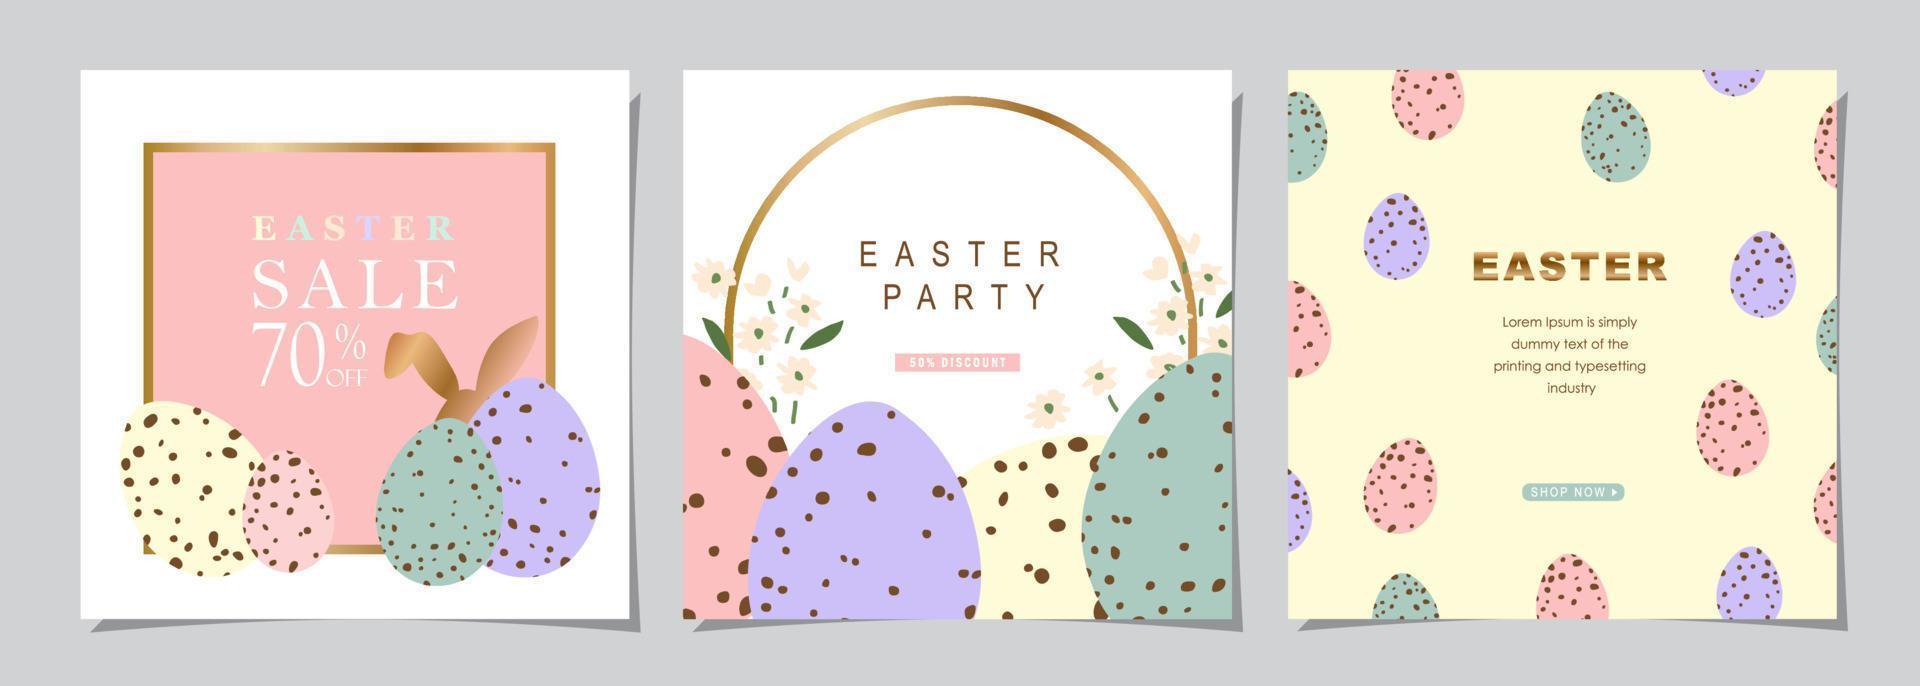 Happy Easter Set of Sale banners, social media, greeting cards, posters, holiday covers. Trendy design with typography, hand painted plants, eggs and bunny, in pastel colors. banner background. vector